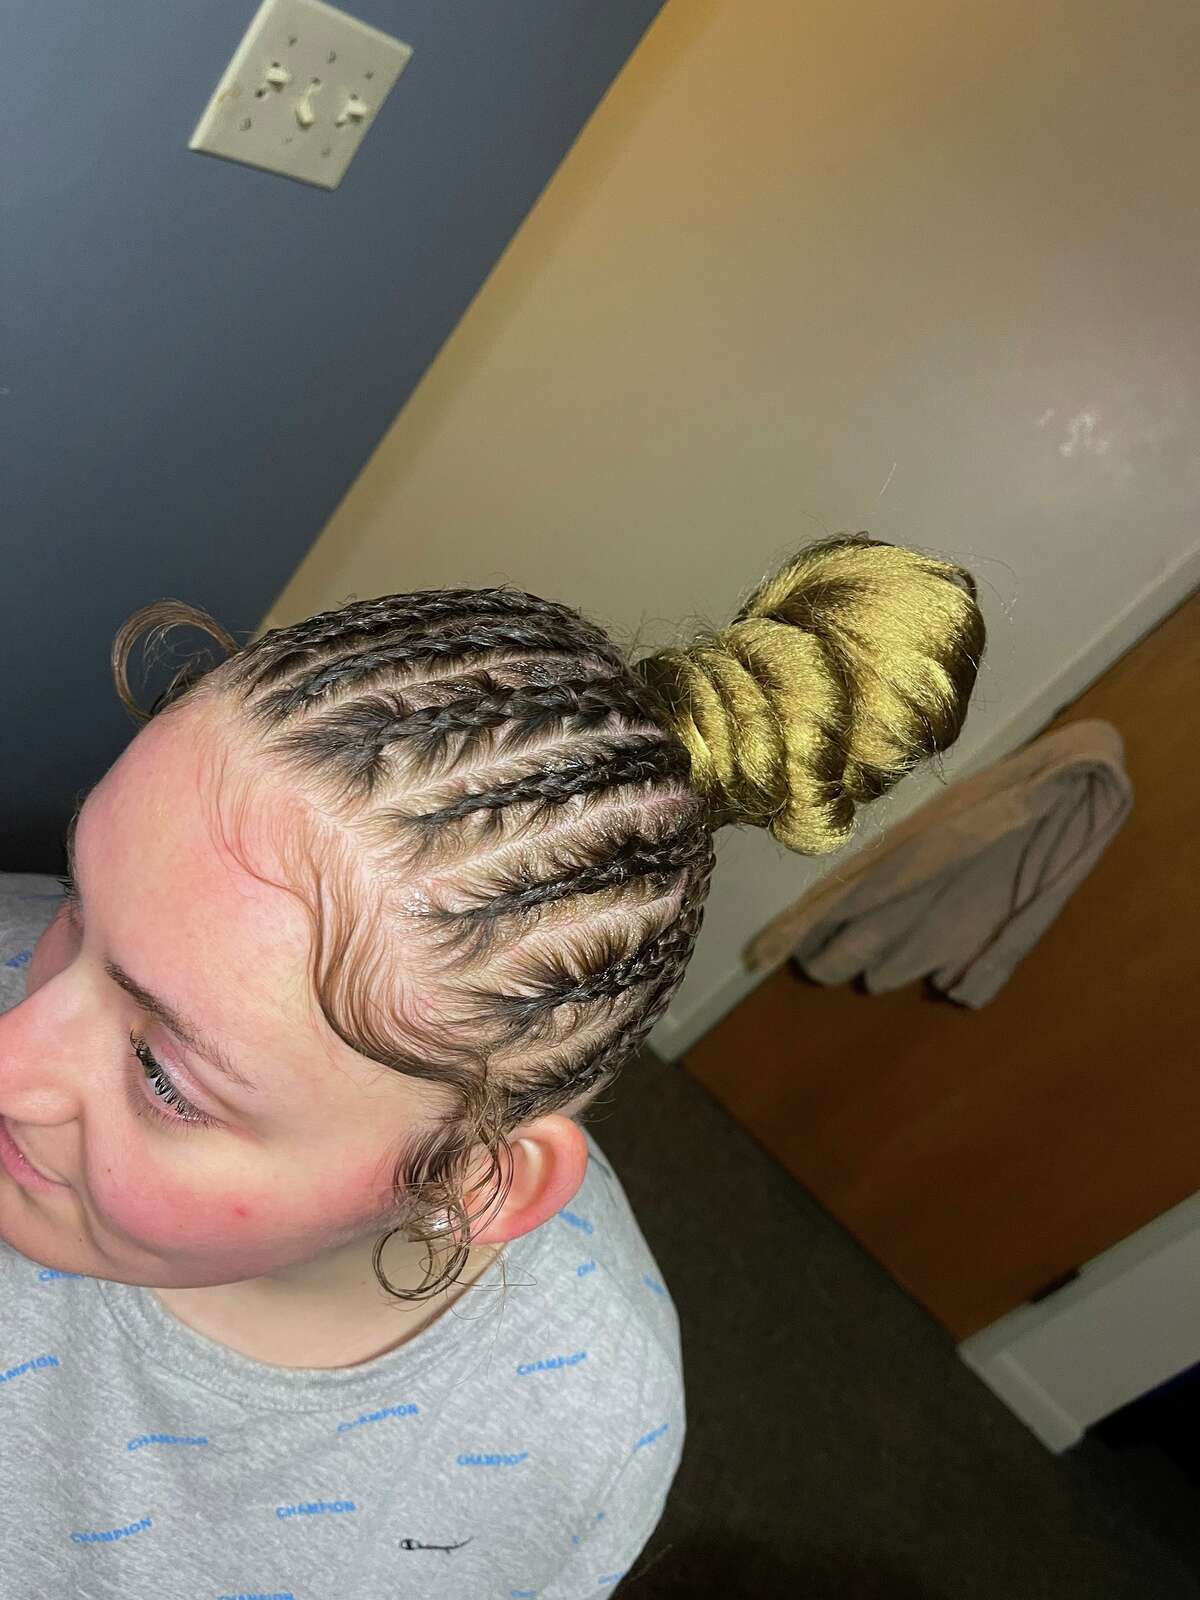 Tamera Motley of Big Rapids has been working as a roaming hairstylist for the last year after transitioning her gift for braiding into a small business.